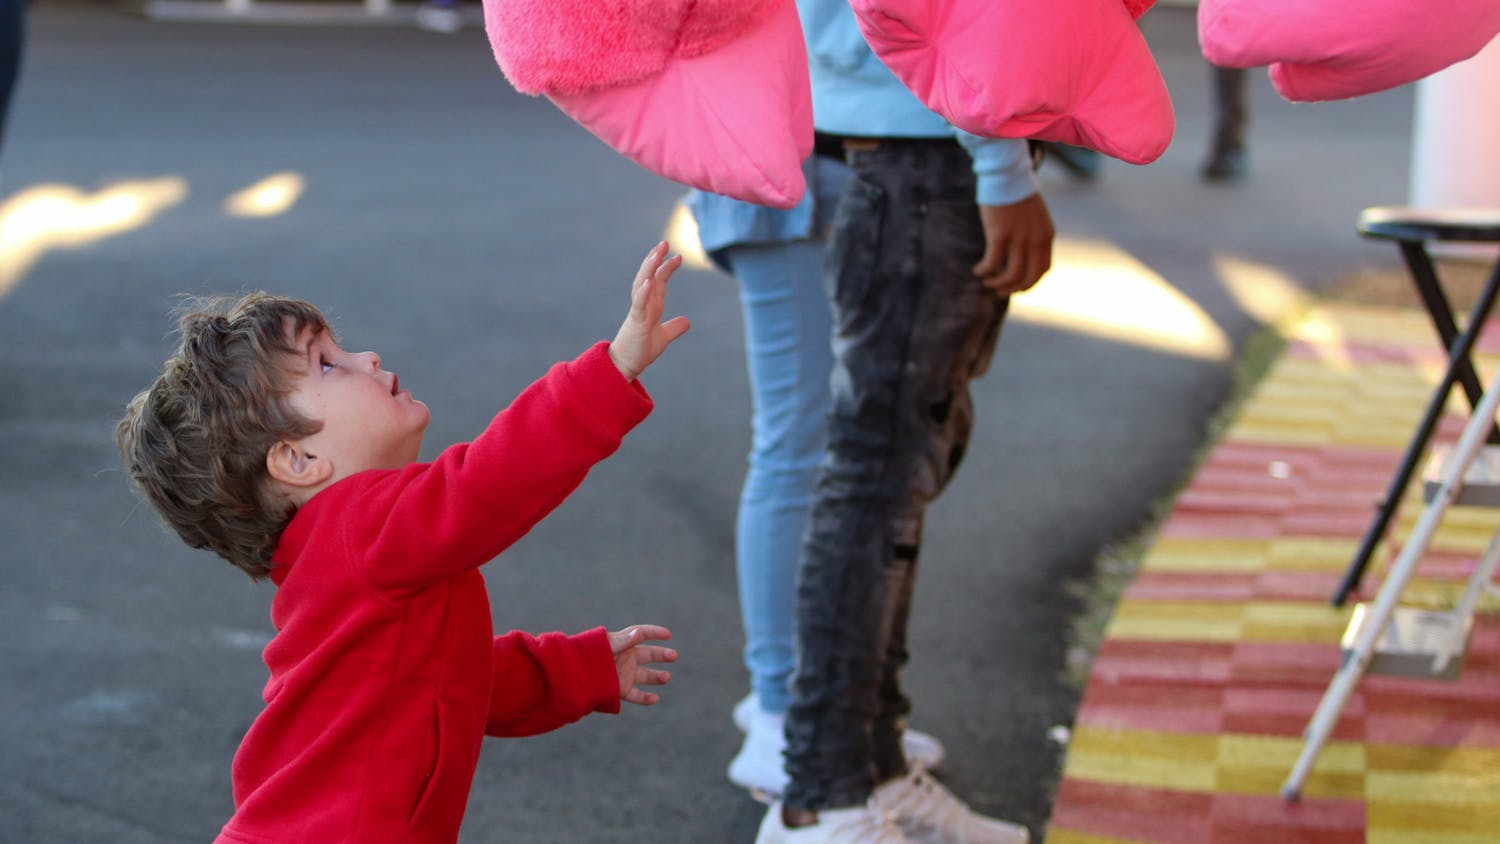 A young boy reaches for a giant pink gorilla hanging outside one of the many carnival games featured at the South Carolina State Fair on Oct. 21, 2022. The water ballon popping game awards animal and popular culture themed prizes to individuals who can win the game.